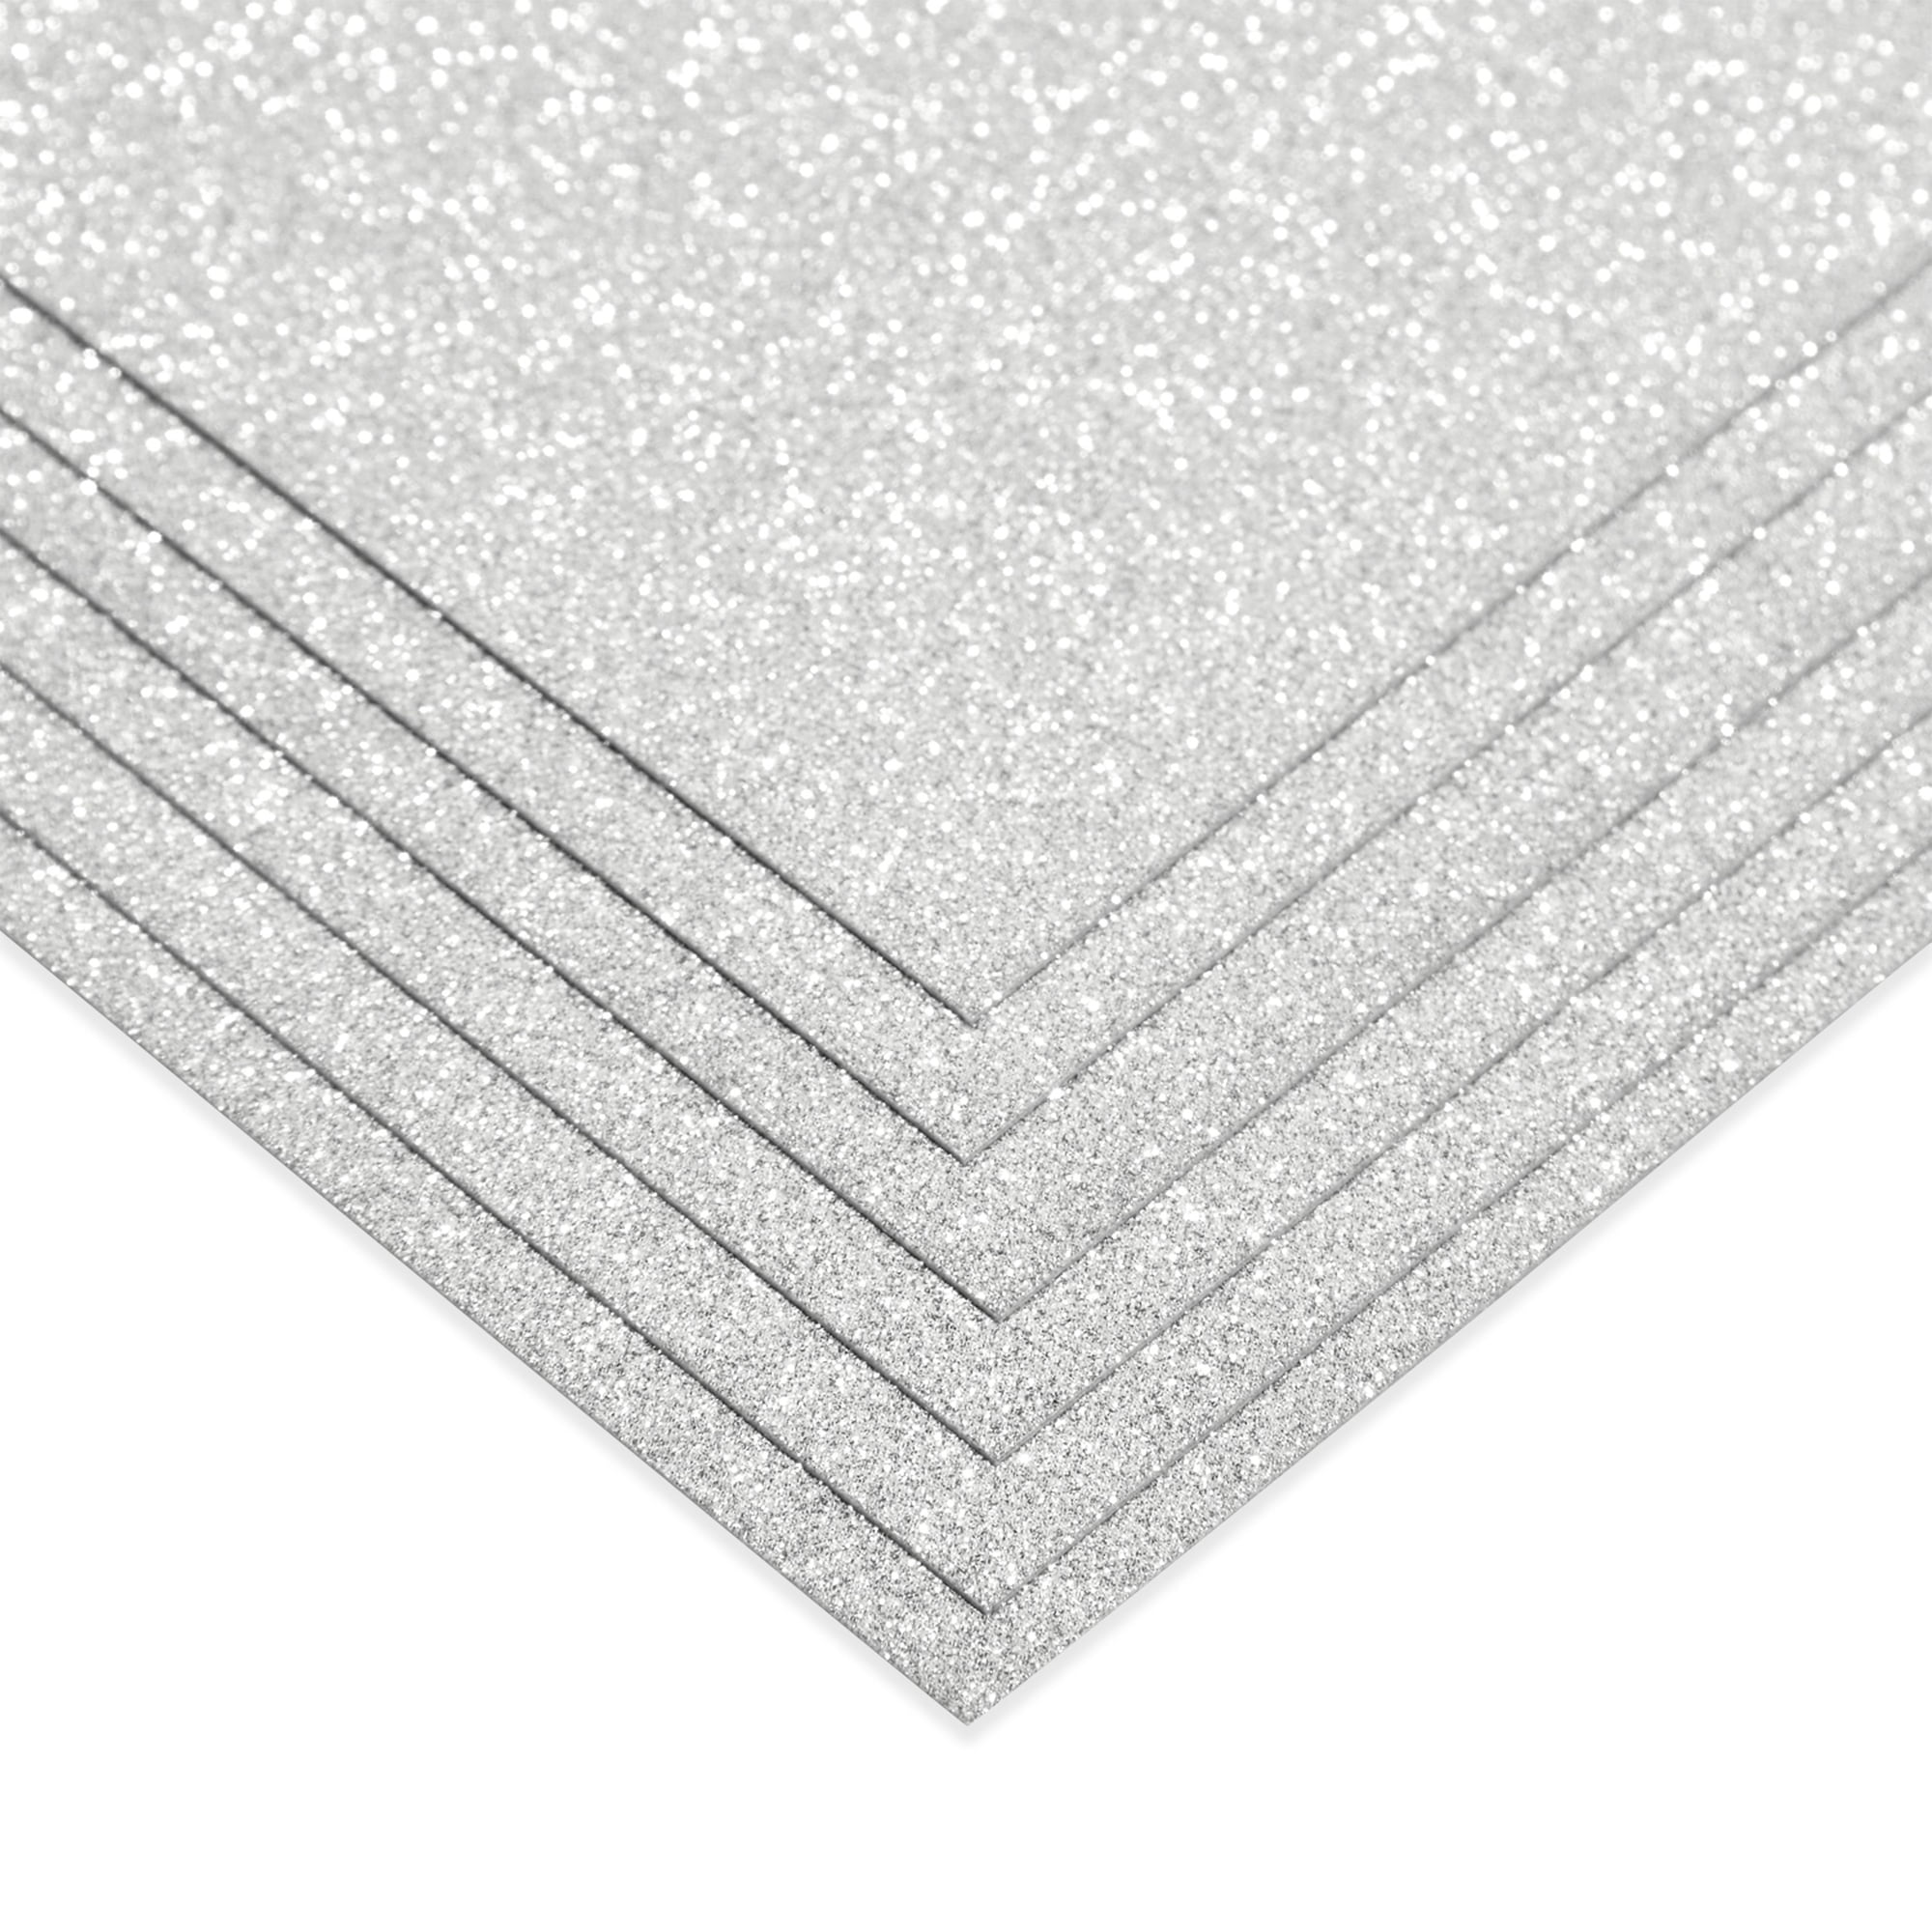 Chunky Silver Glitter Paper Sheets for Crafts (11 x 8.75 in, 30 Pack), PACK  - Jay C Food Stores